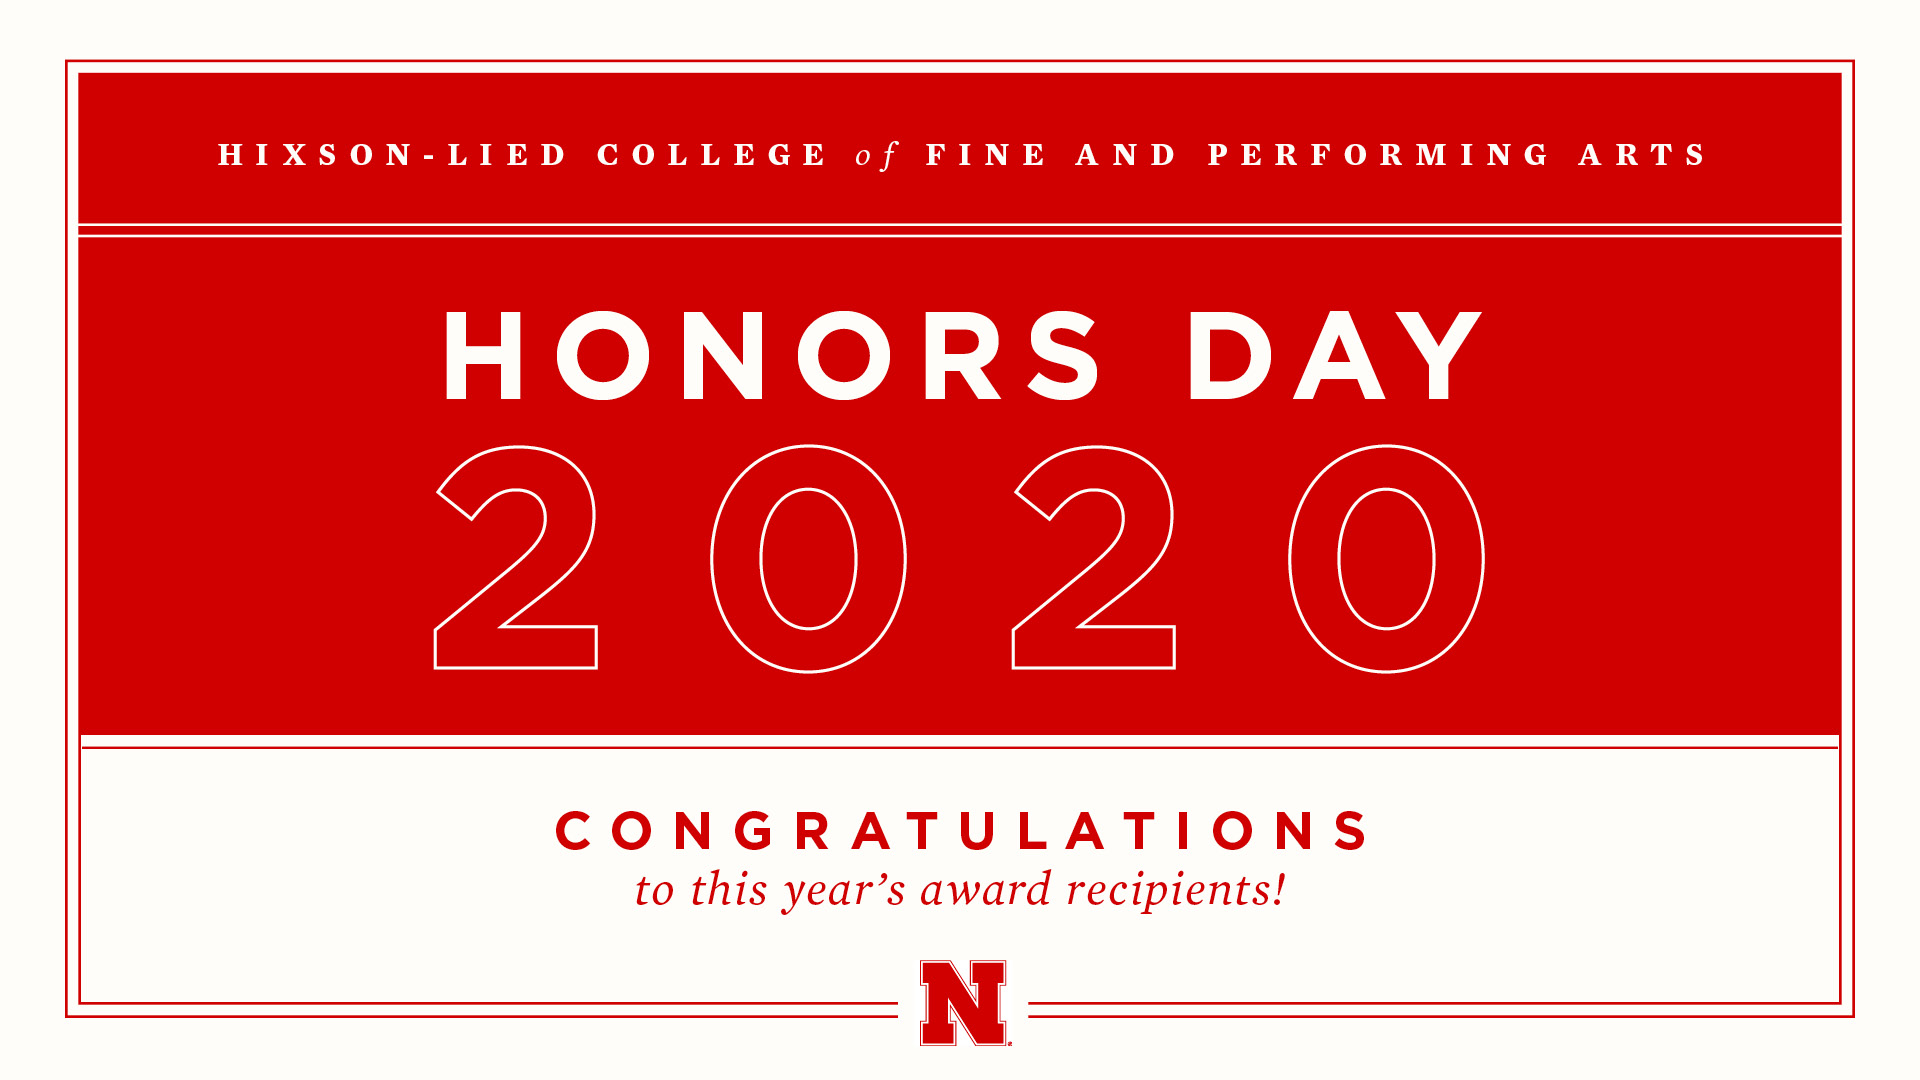 n-Lied College of Fine and Performing Arts congratulates the outstanding students, faculty, staff and alumni, who are recipients of our Honors Day awards this year.